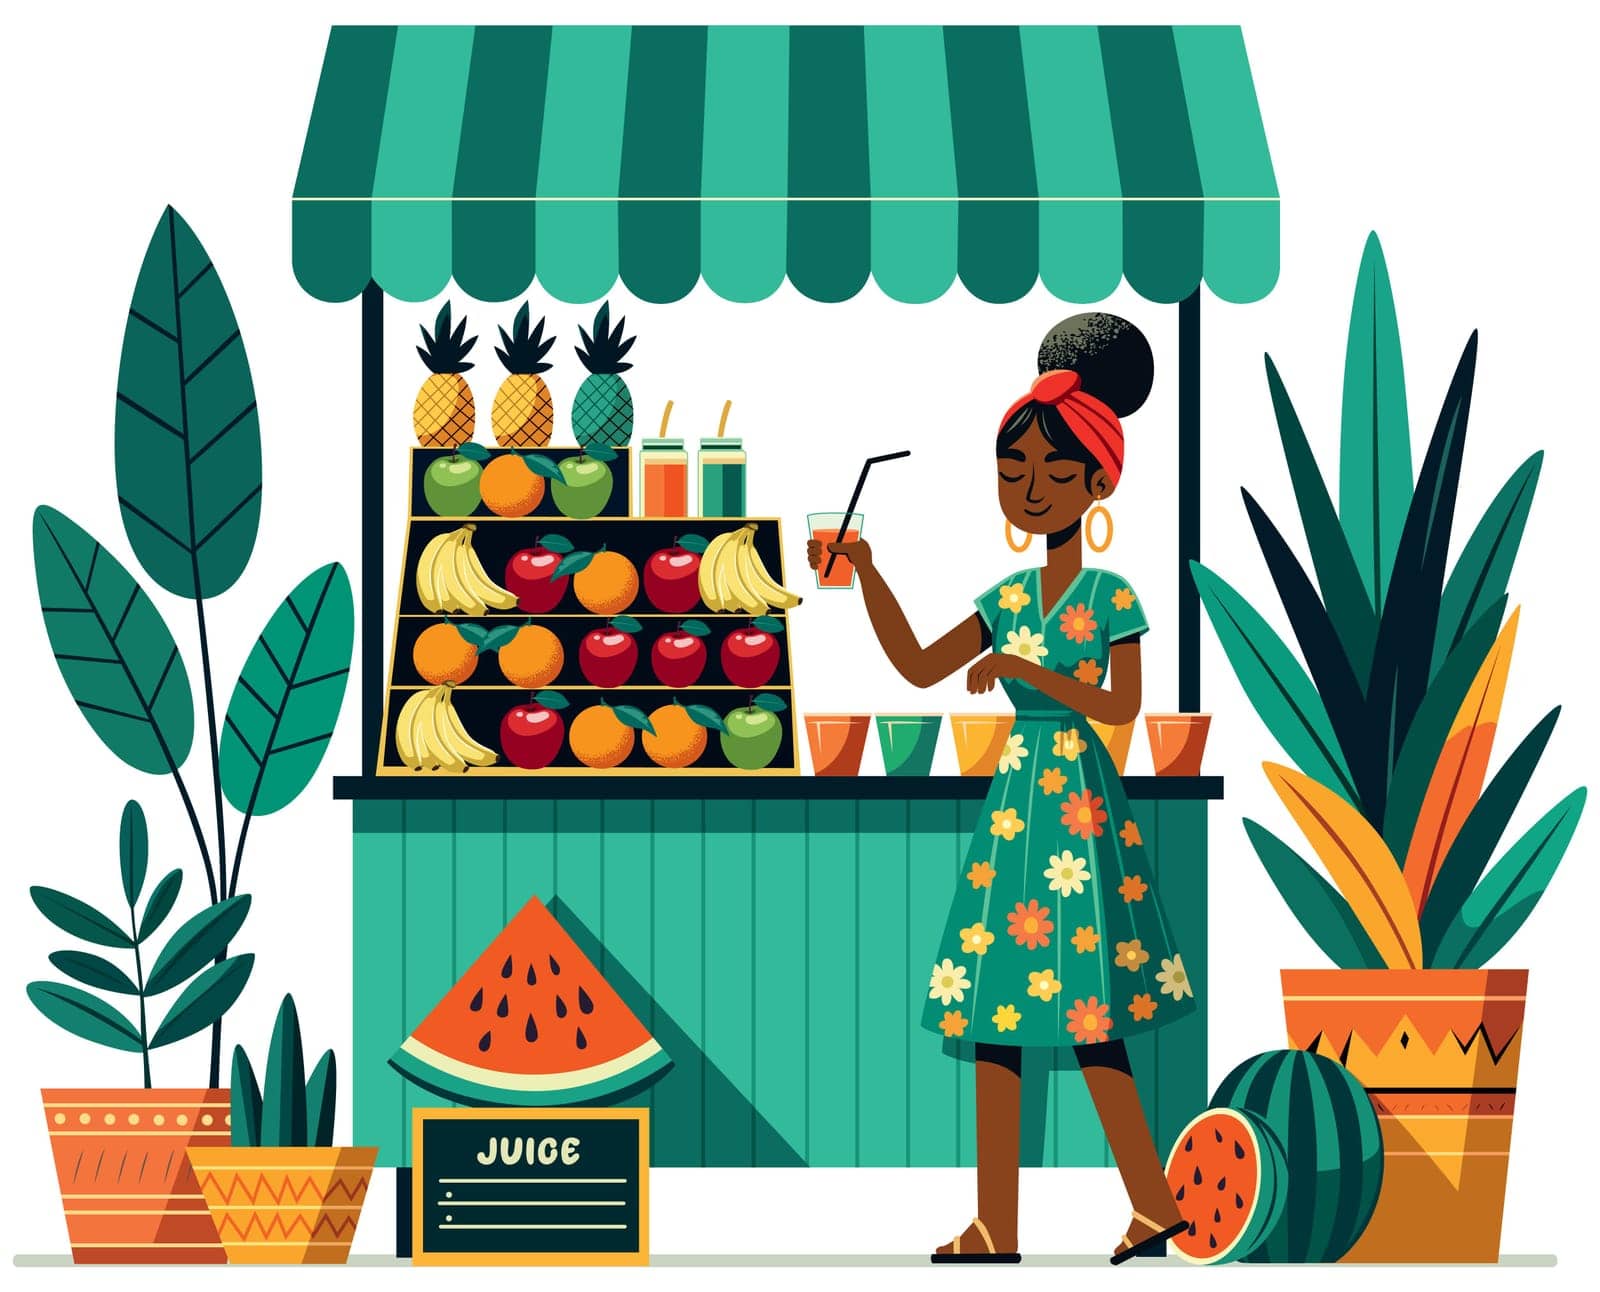 Flat design illustration of an African woman serving juice at a vibrant street stand, isolated on white background.